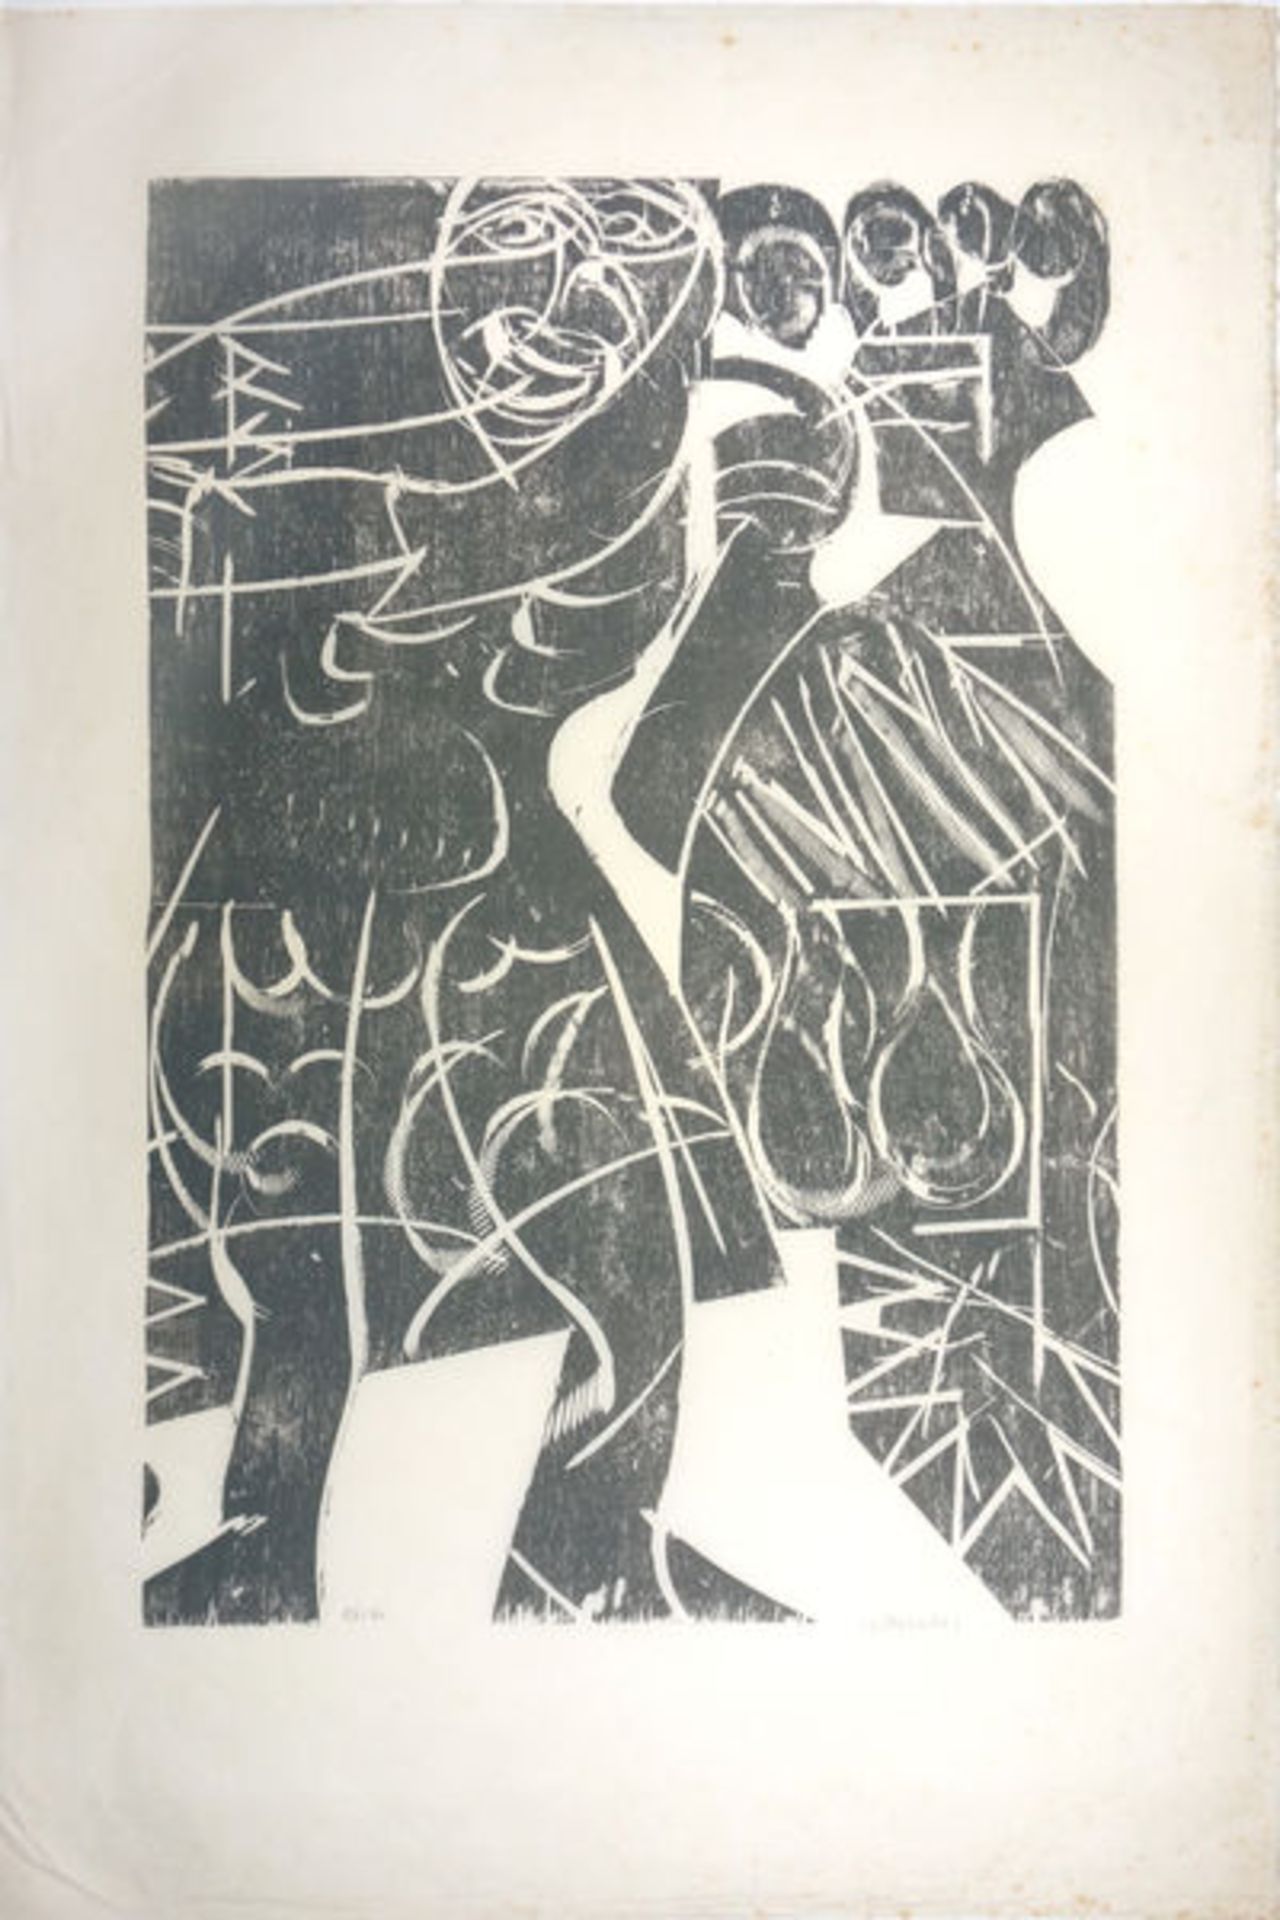 Simon von Cyrene (1970)Woodcut in grey on japan paper. Signed. Numbered "47/80". Sheet size: 92,5